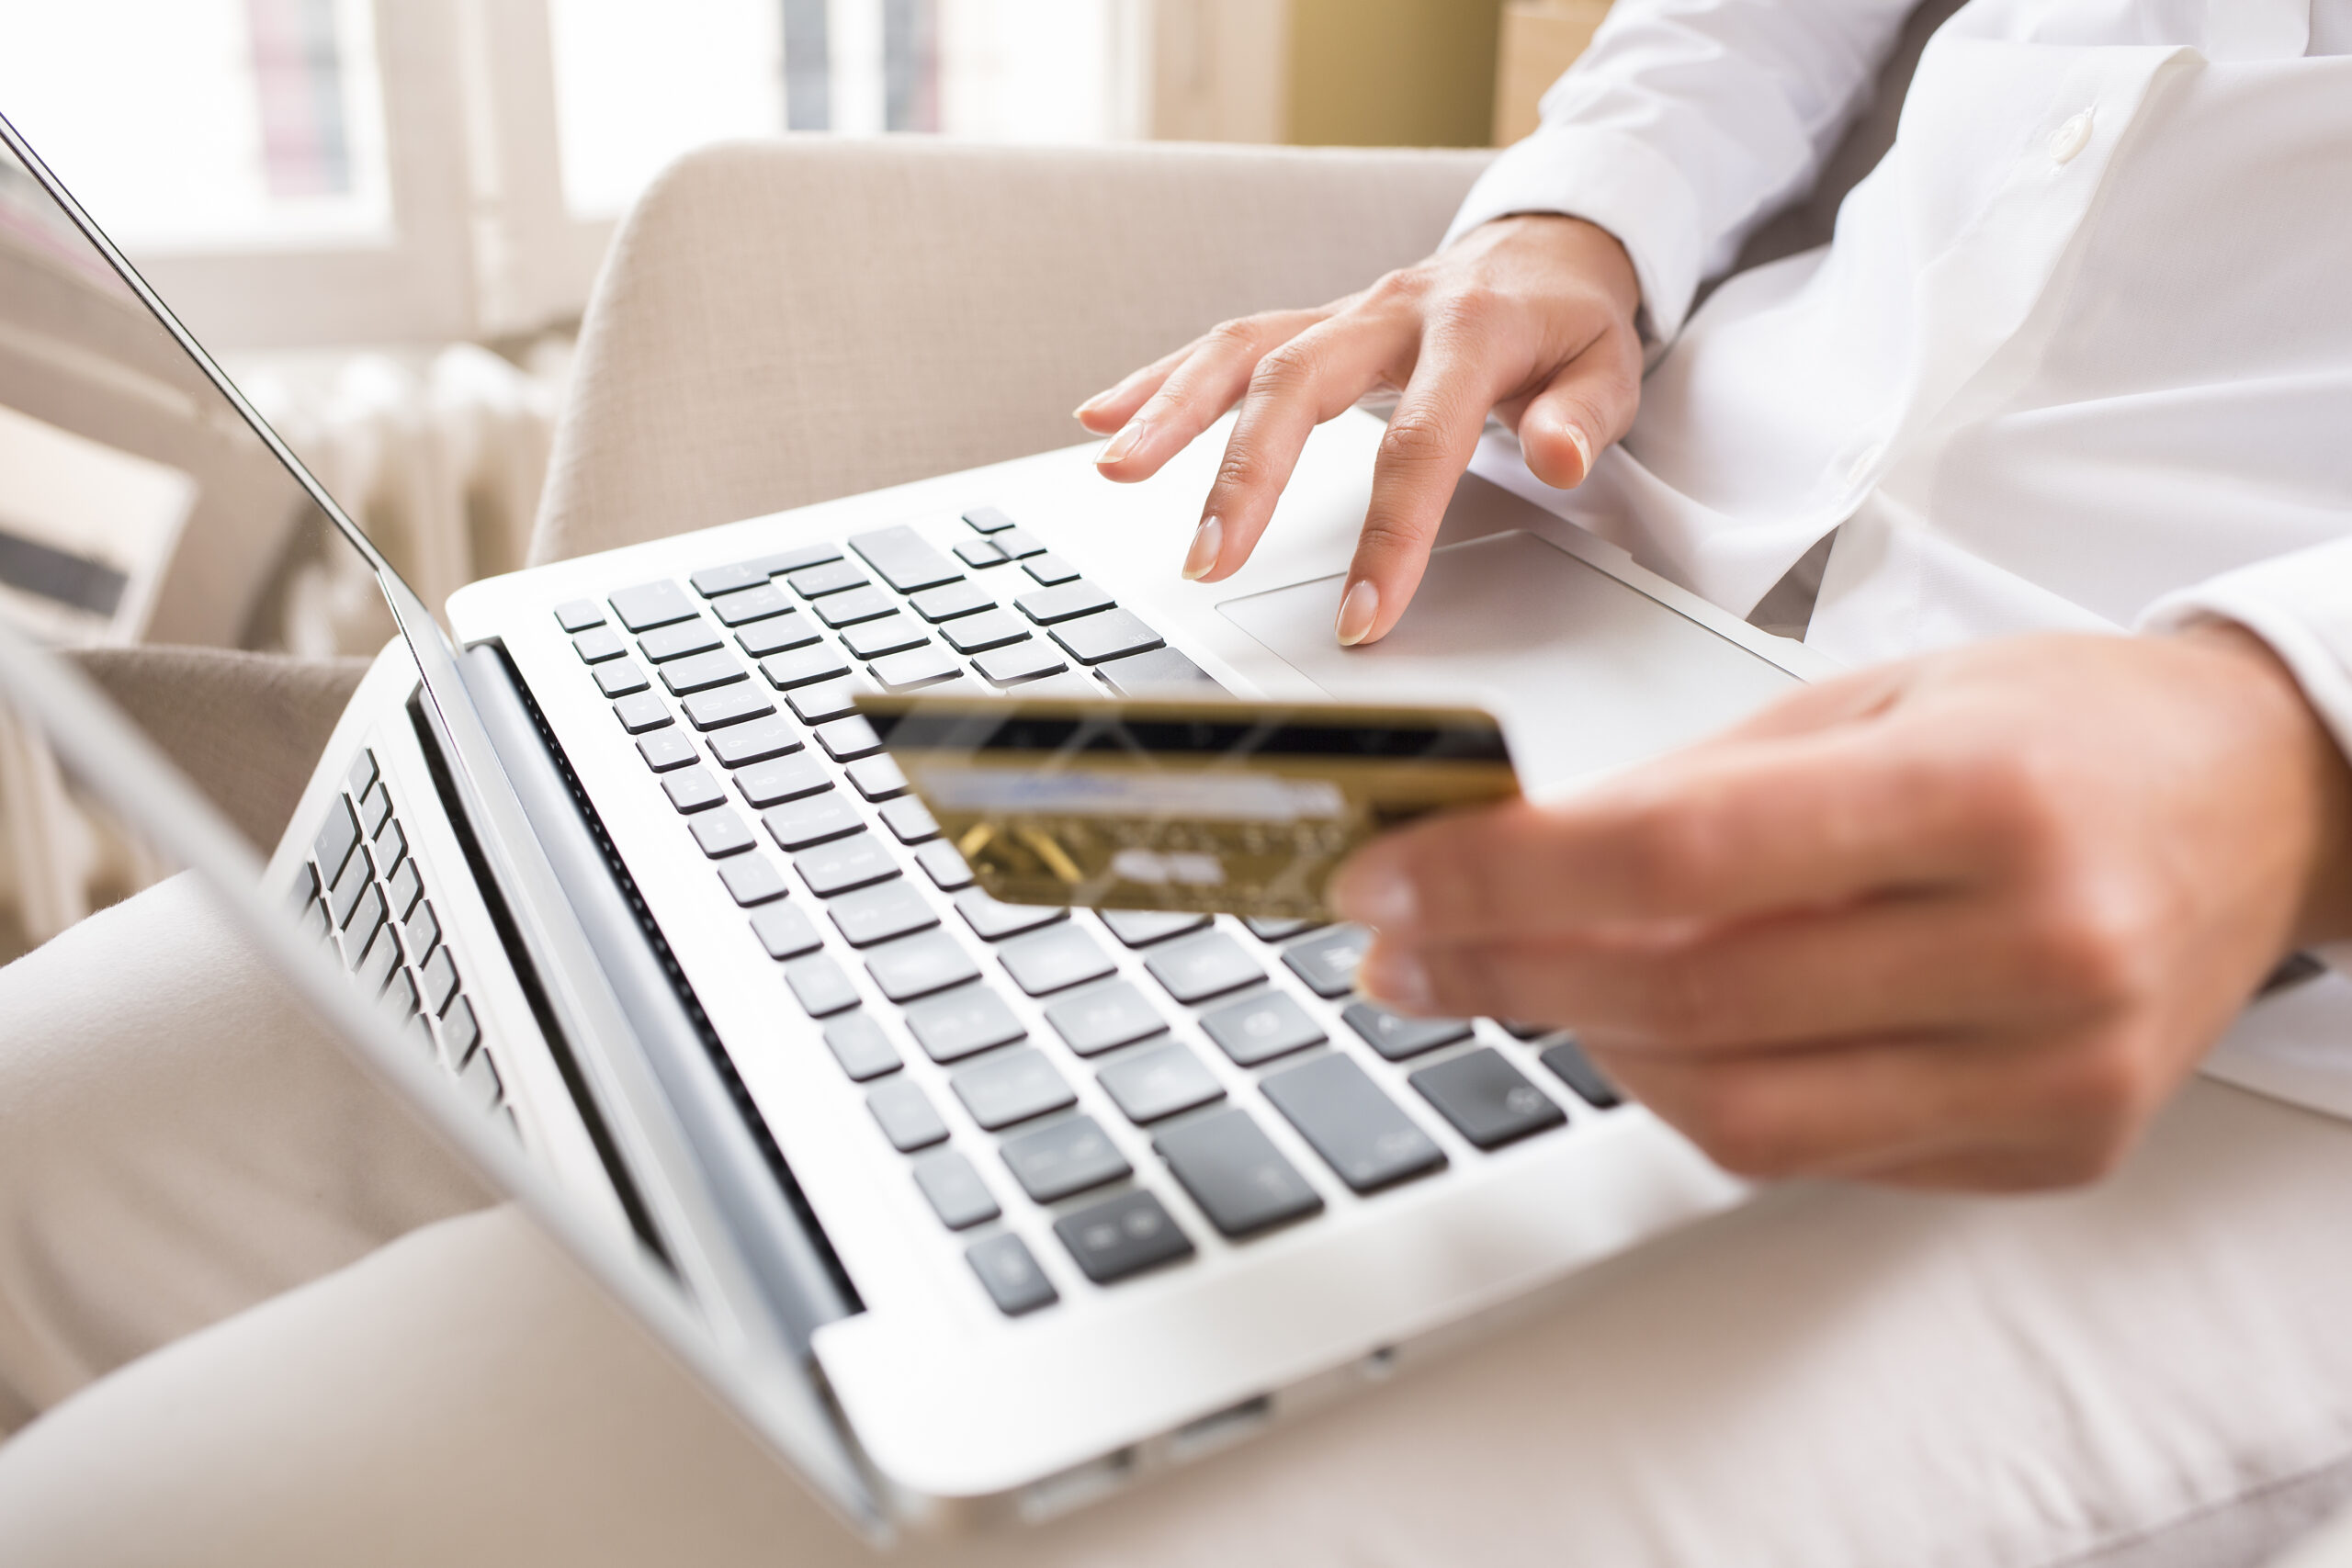 Close-up woman's hands holding a credit card and using computer